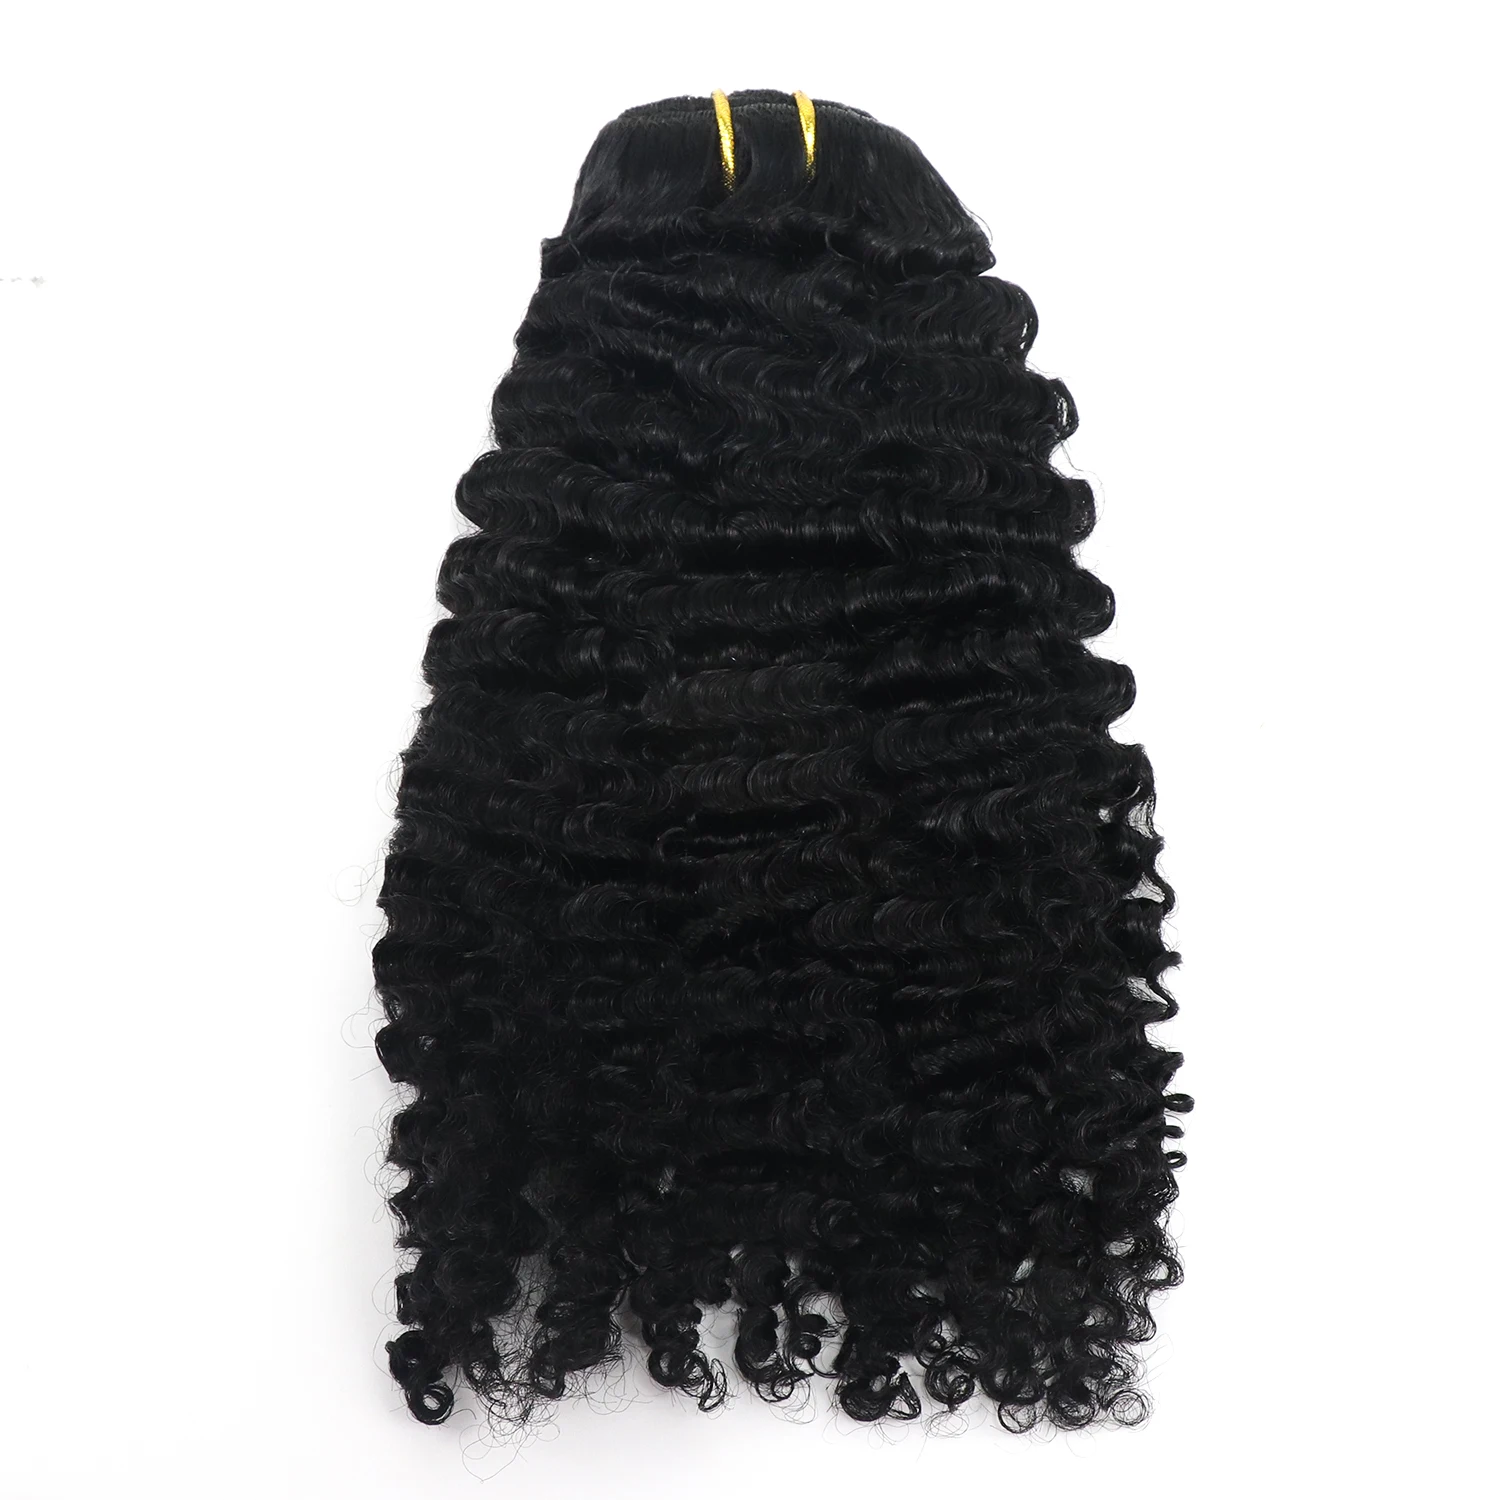 

Hot Selling Natural Hair 4a 4b 4c Afro Kinky Curly Clip In Hair Extensions 100% Human Hair